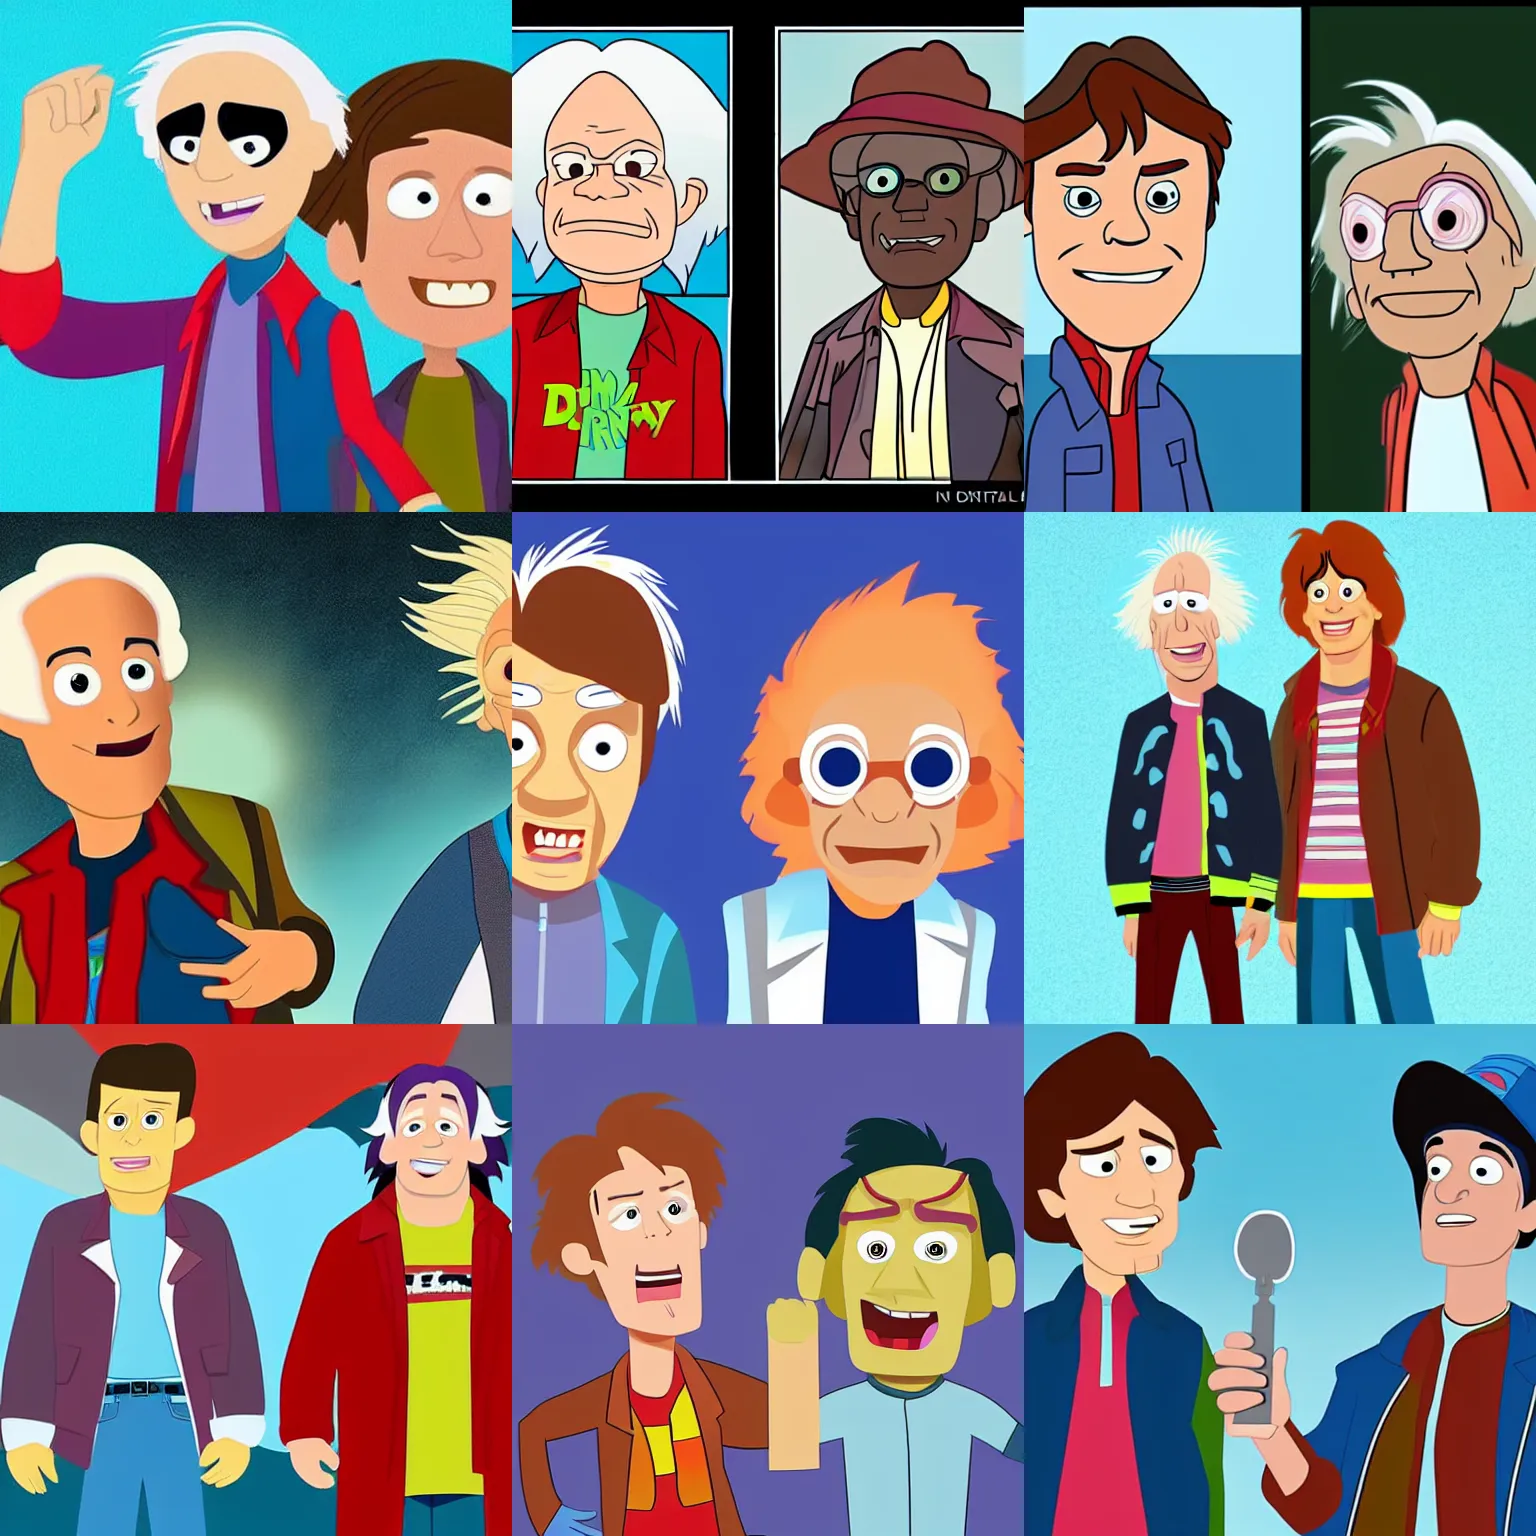 Prompt: marty mcfly and doc brown as pixar animated characters